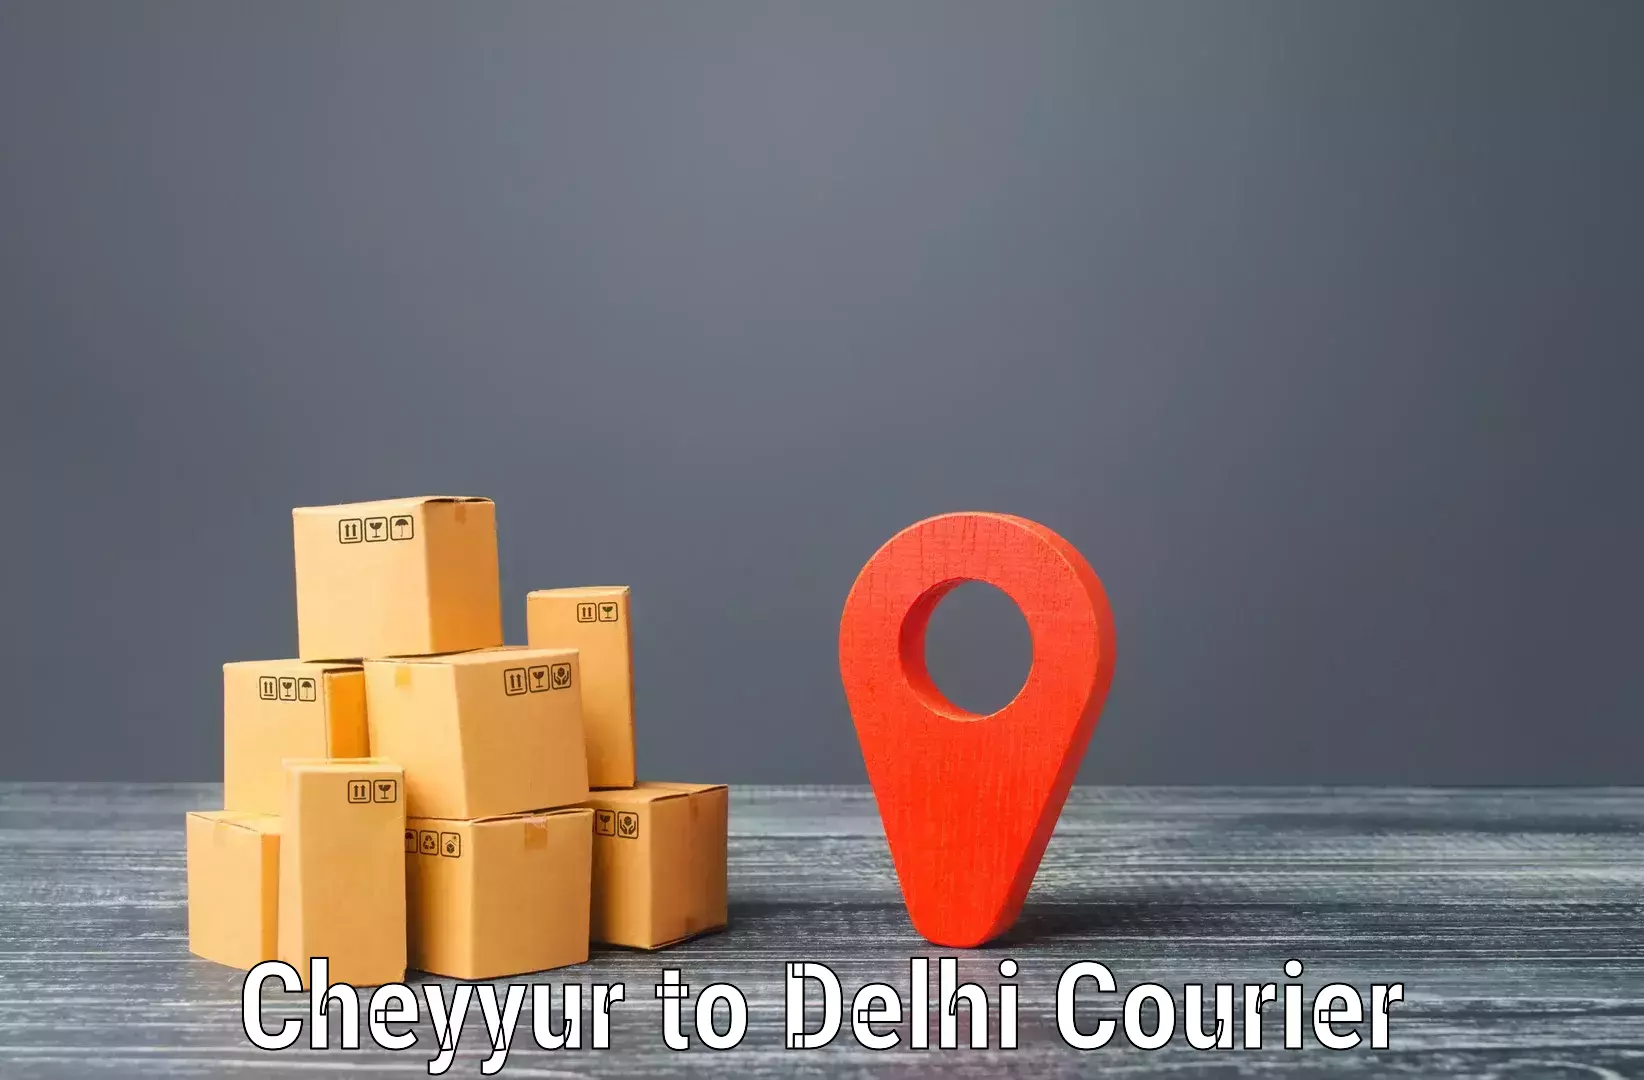 Easy return solutions in Cheyyur to NCR